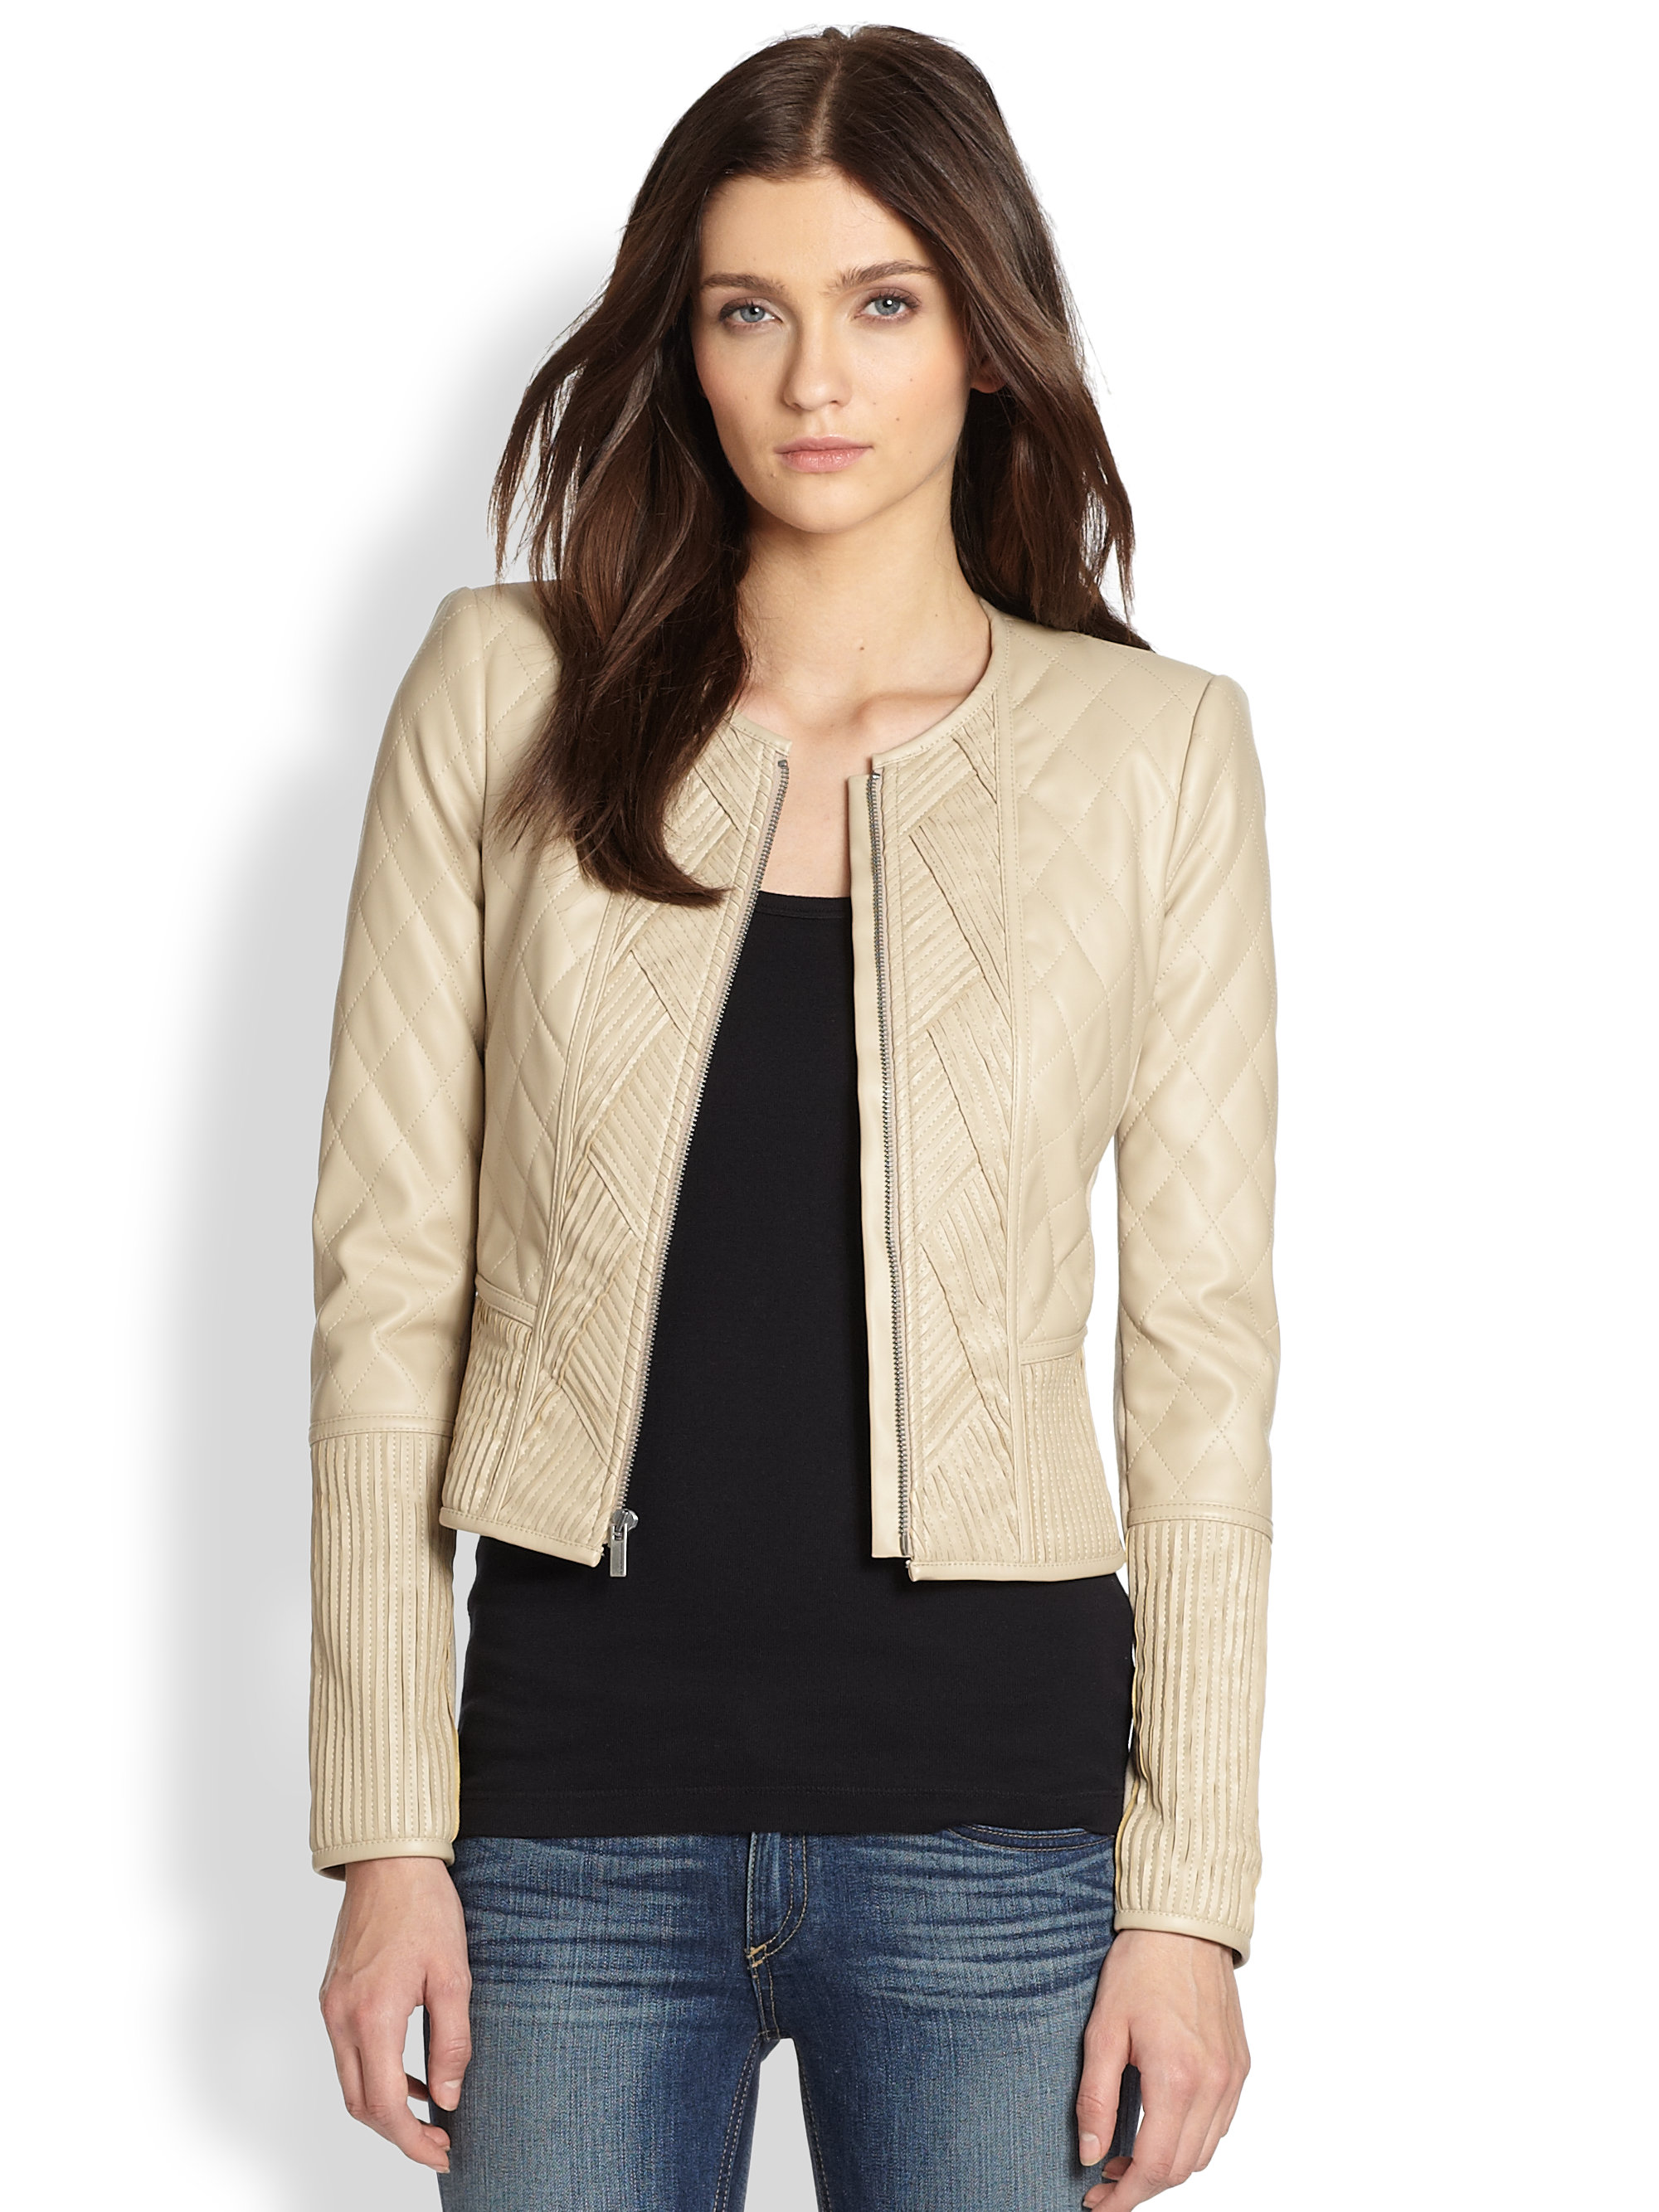 Lyst - Bcbgmaxazria Quilted Faux Leather Jacket in Natural